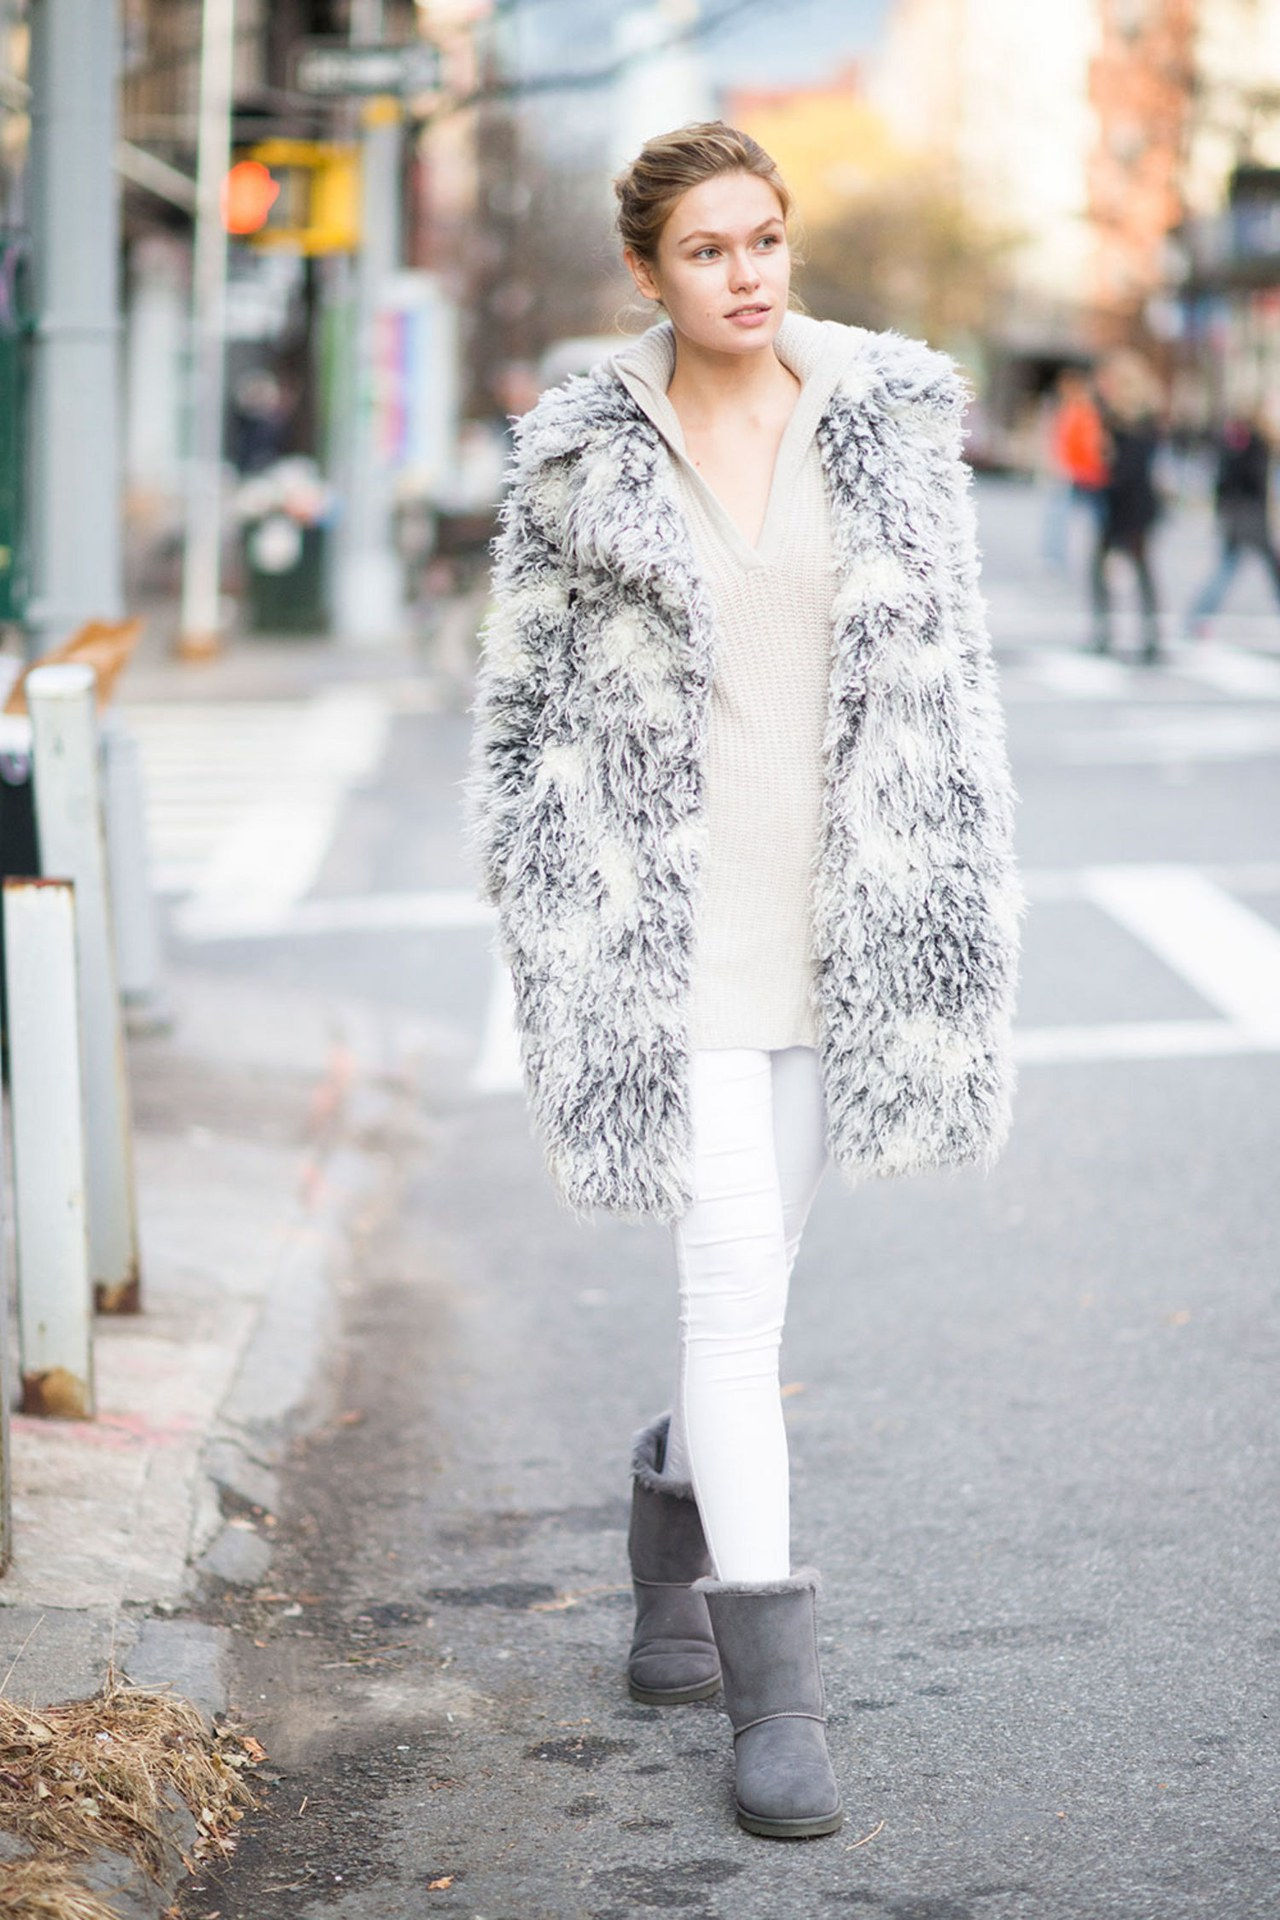 linda ugg street style outfit white jeans gray uggs winter